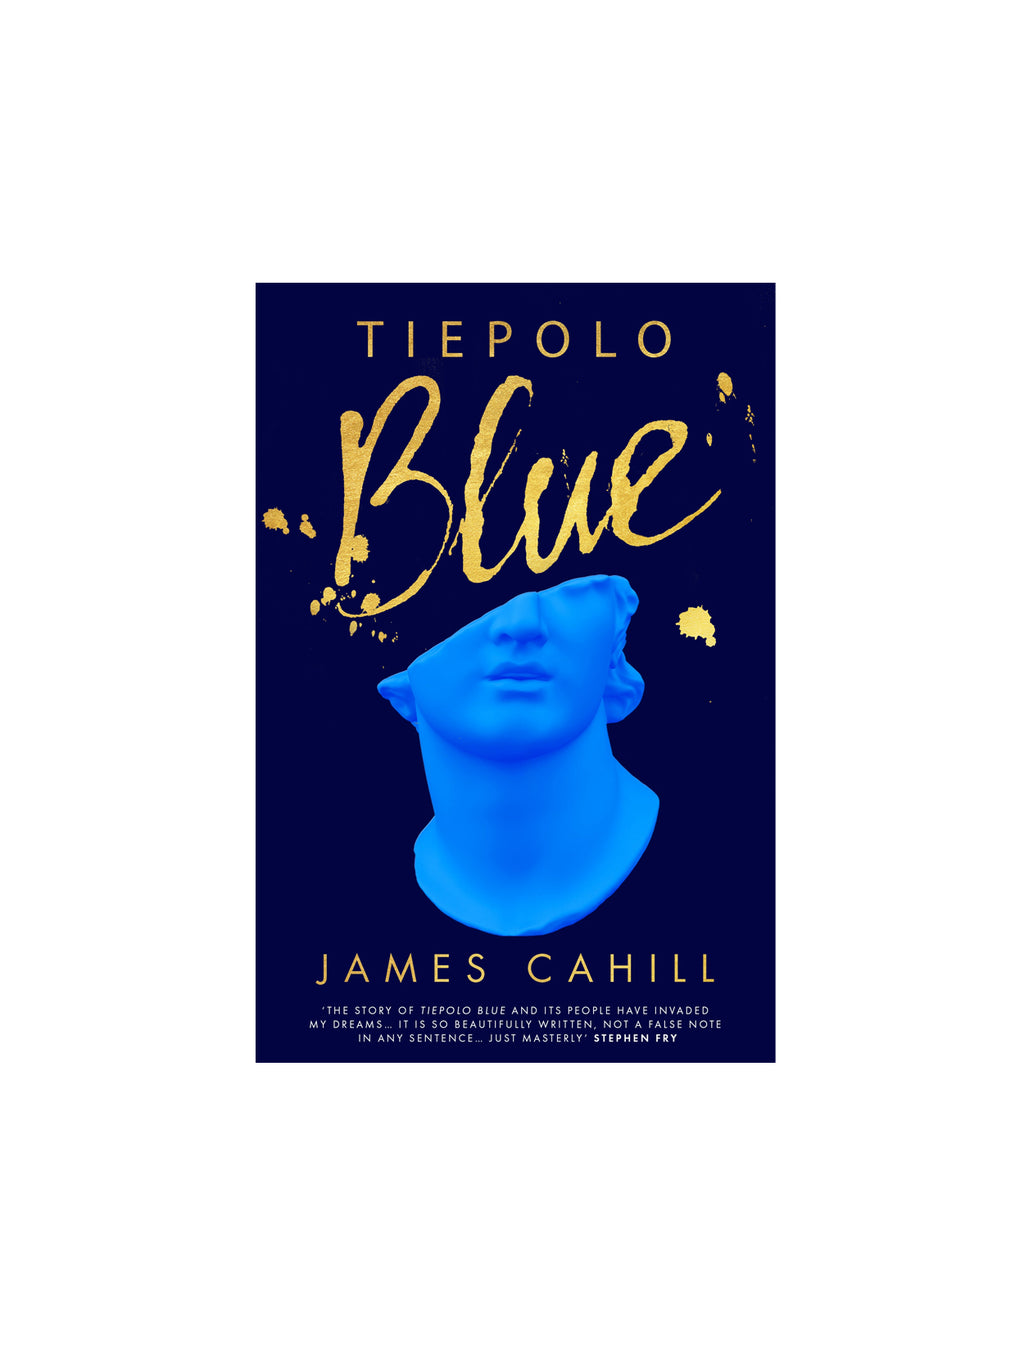 Tiepolo Blue : 'The smart, sexy read you need in 2022' Evening Standard